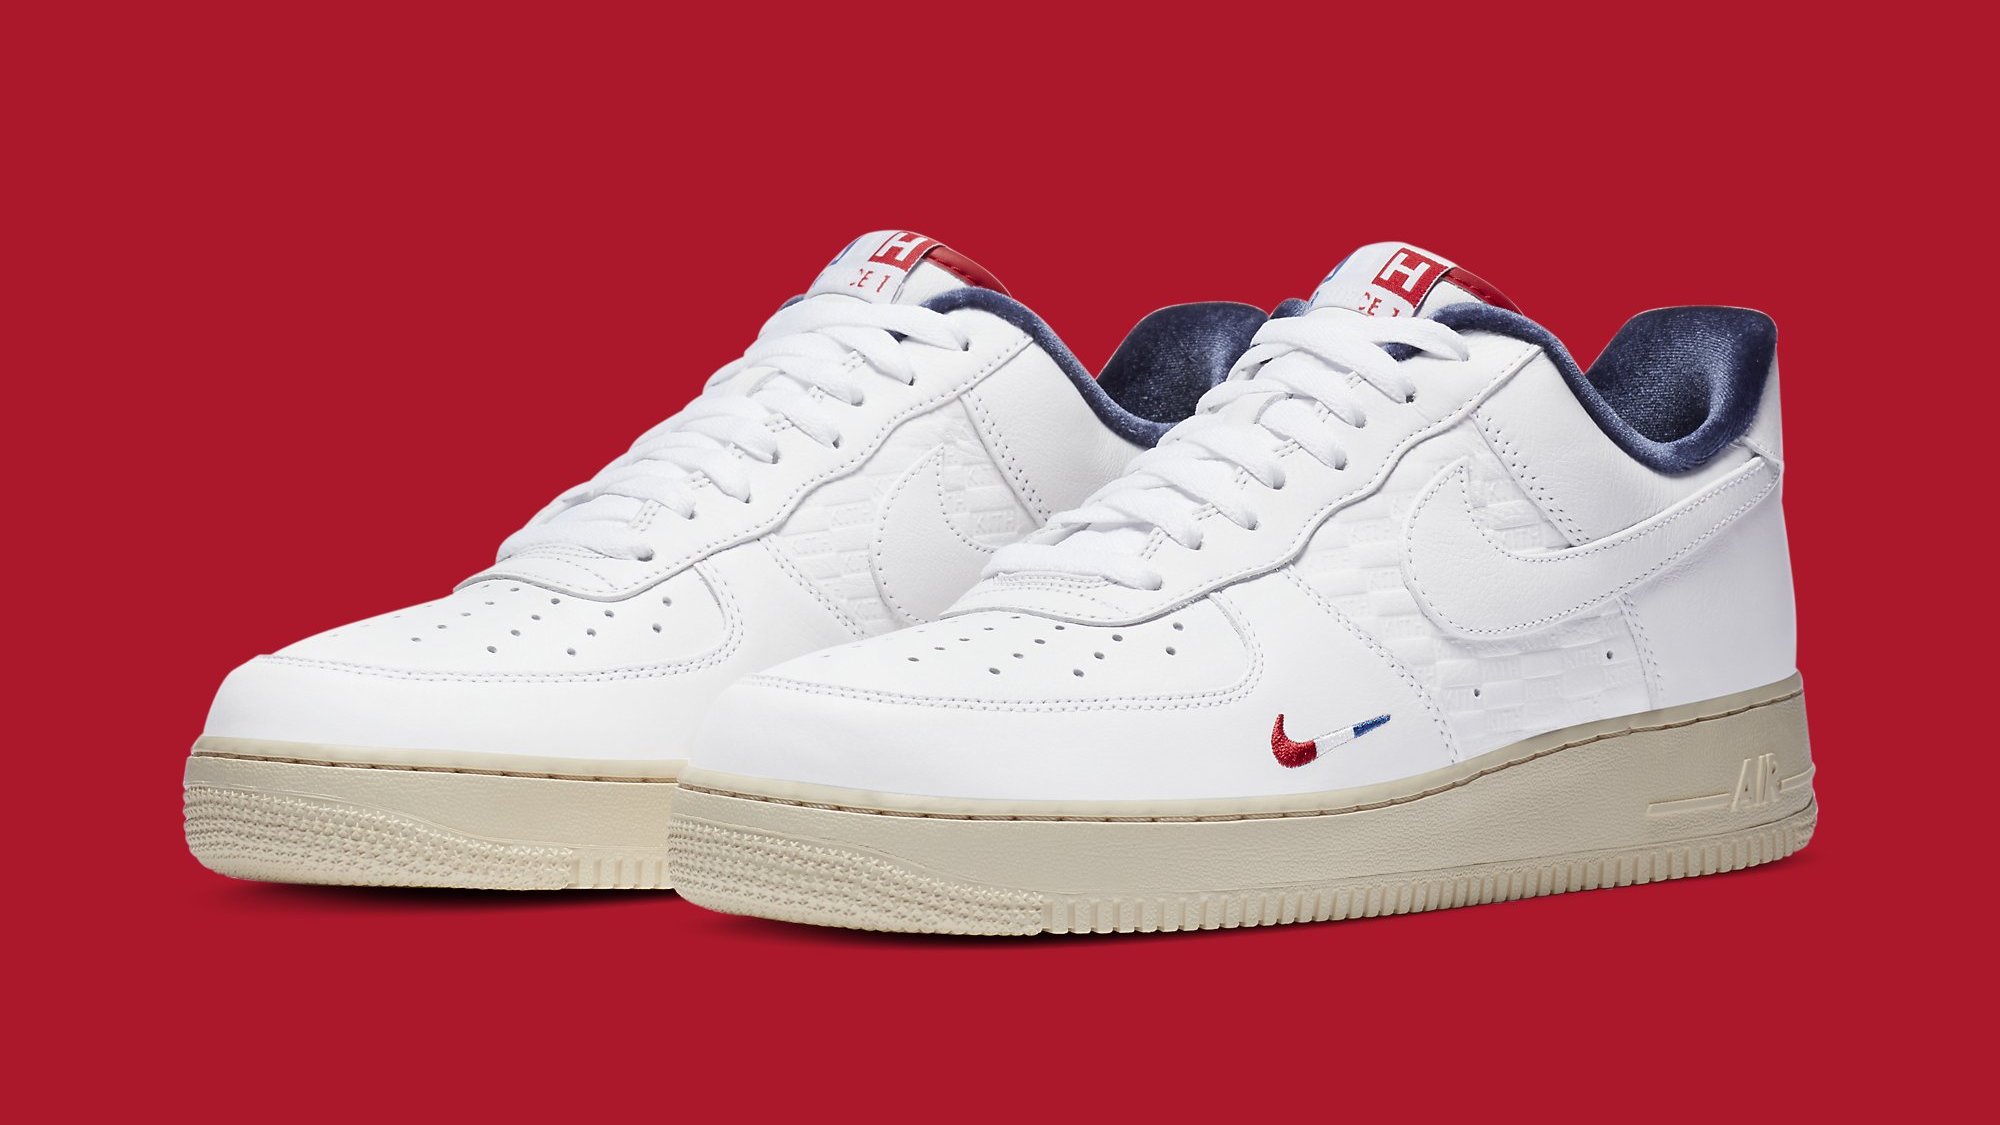 Kith's New Nike Air Force 1 Collab Is Releasing Exclusively in